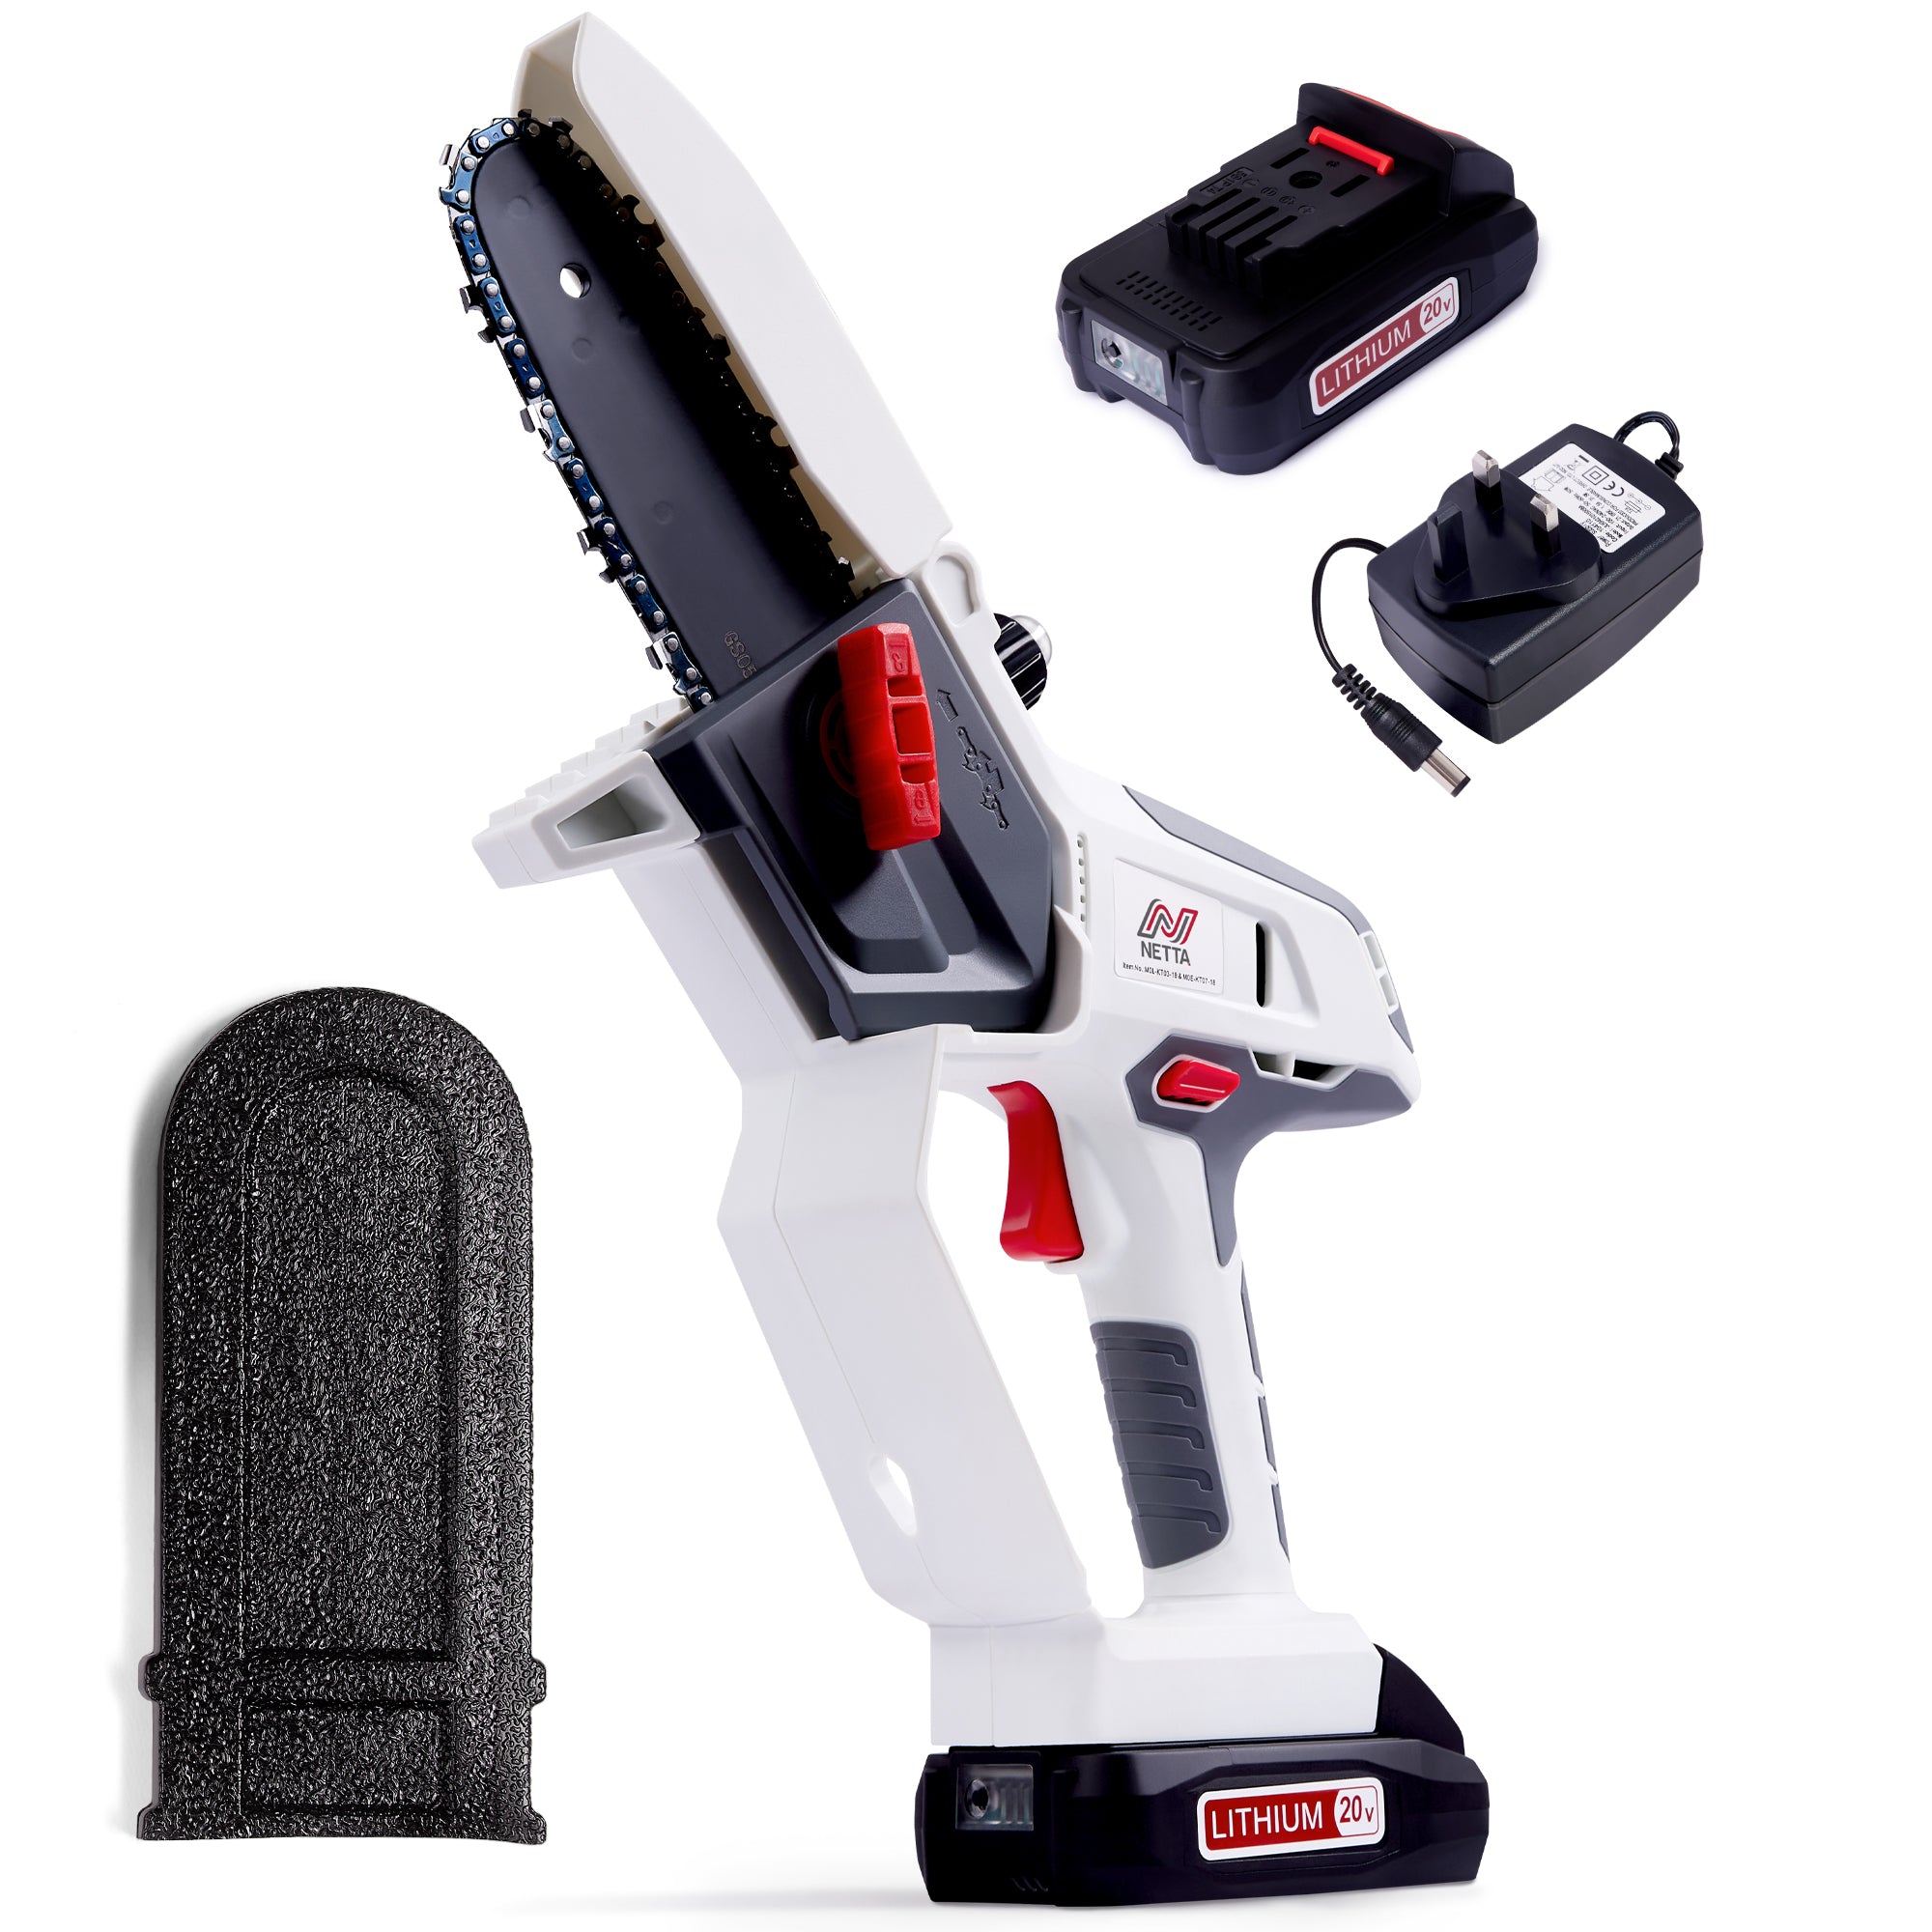 NETTA 20V Cordless Mini Chainsaw - Battery and Charger Included